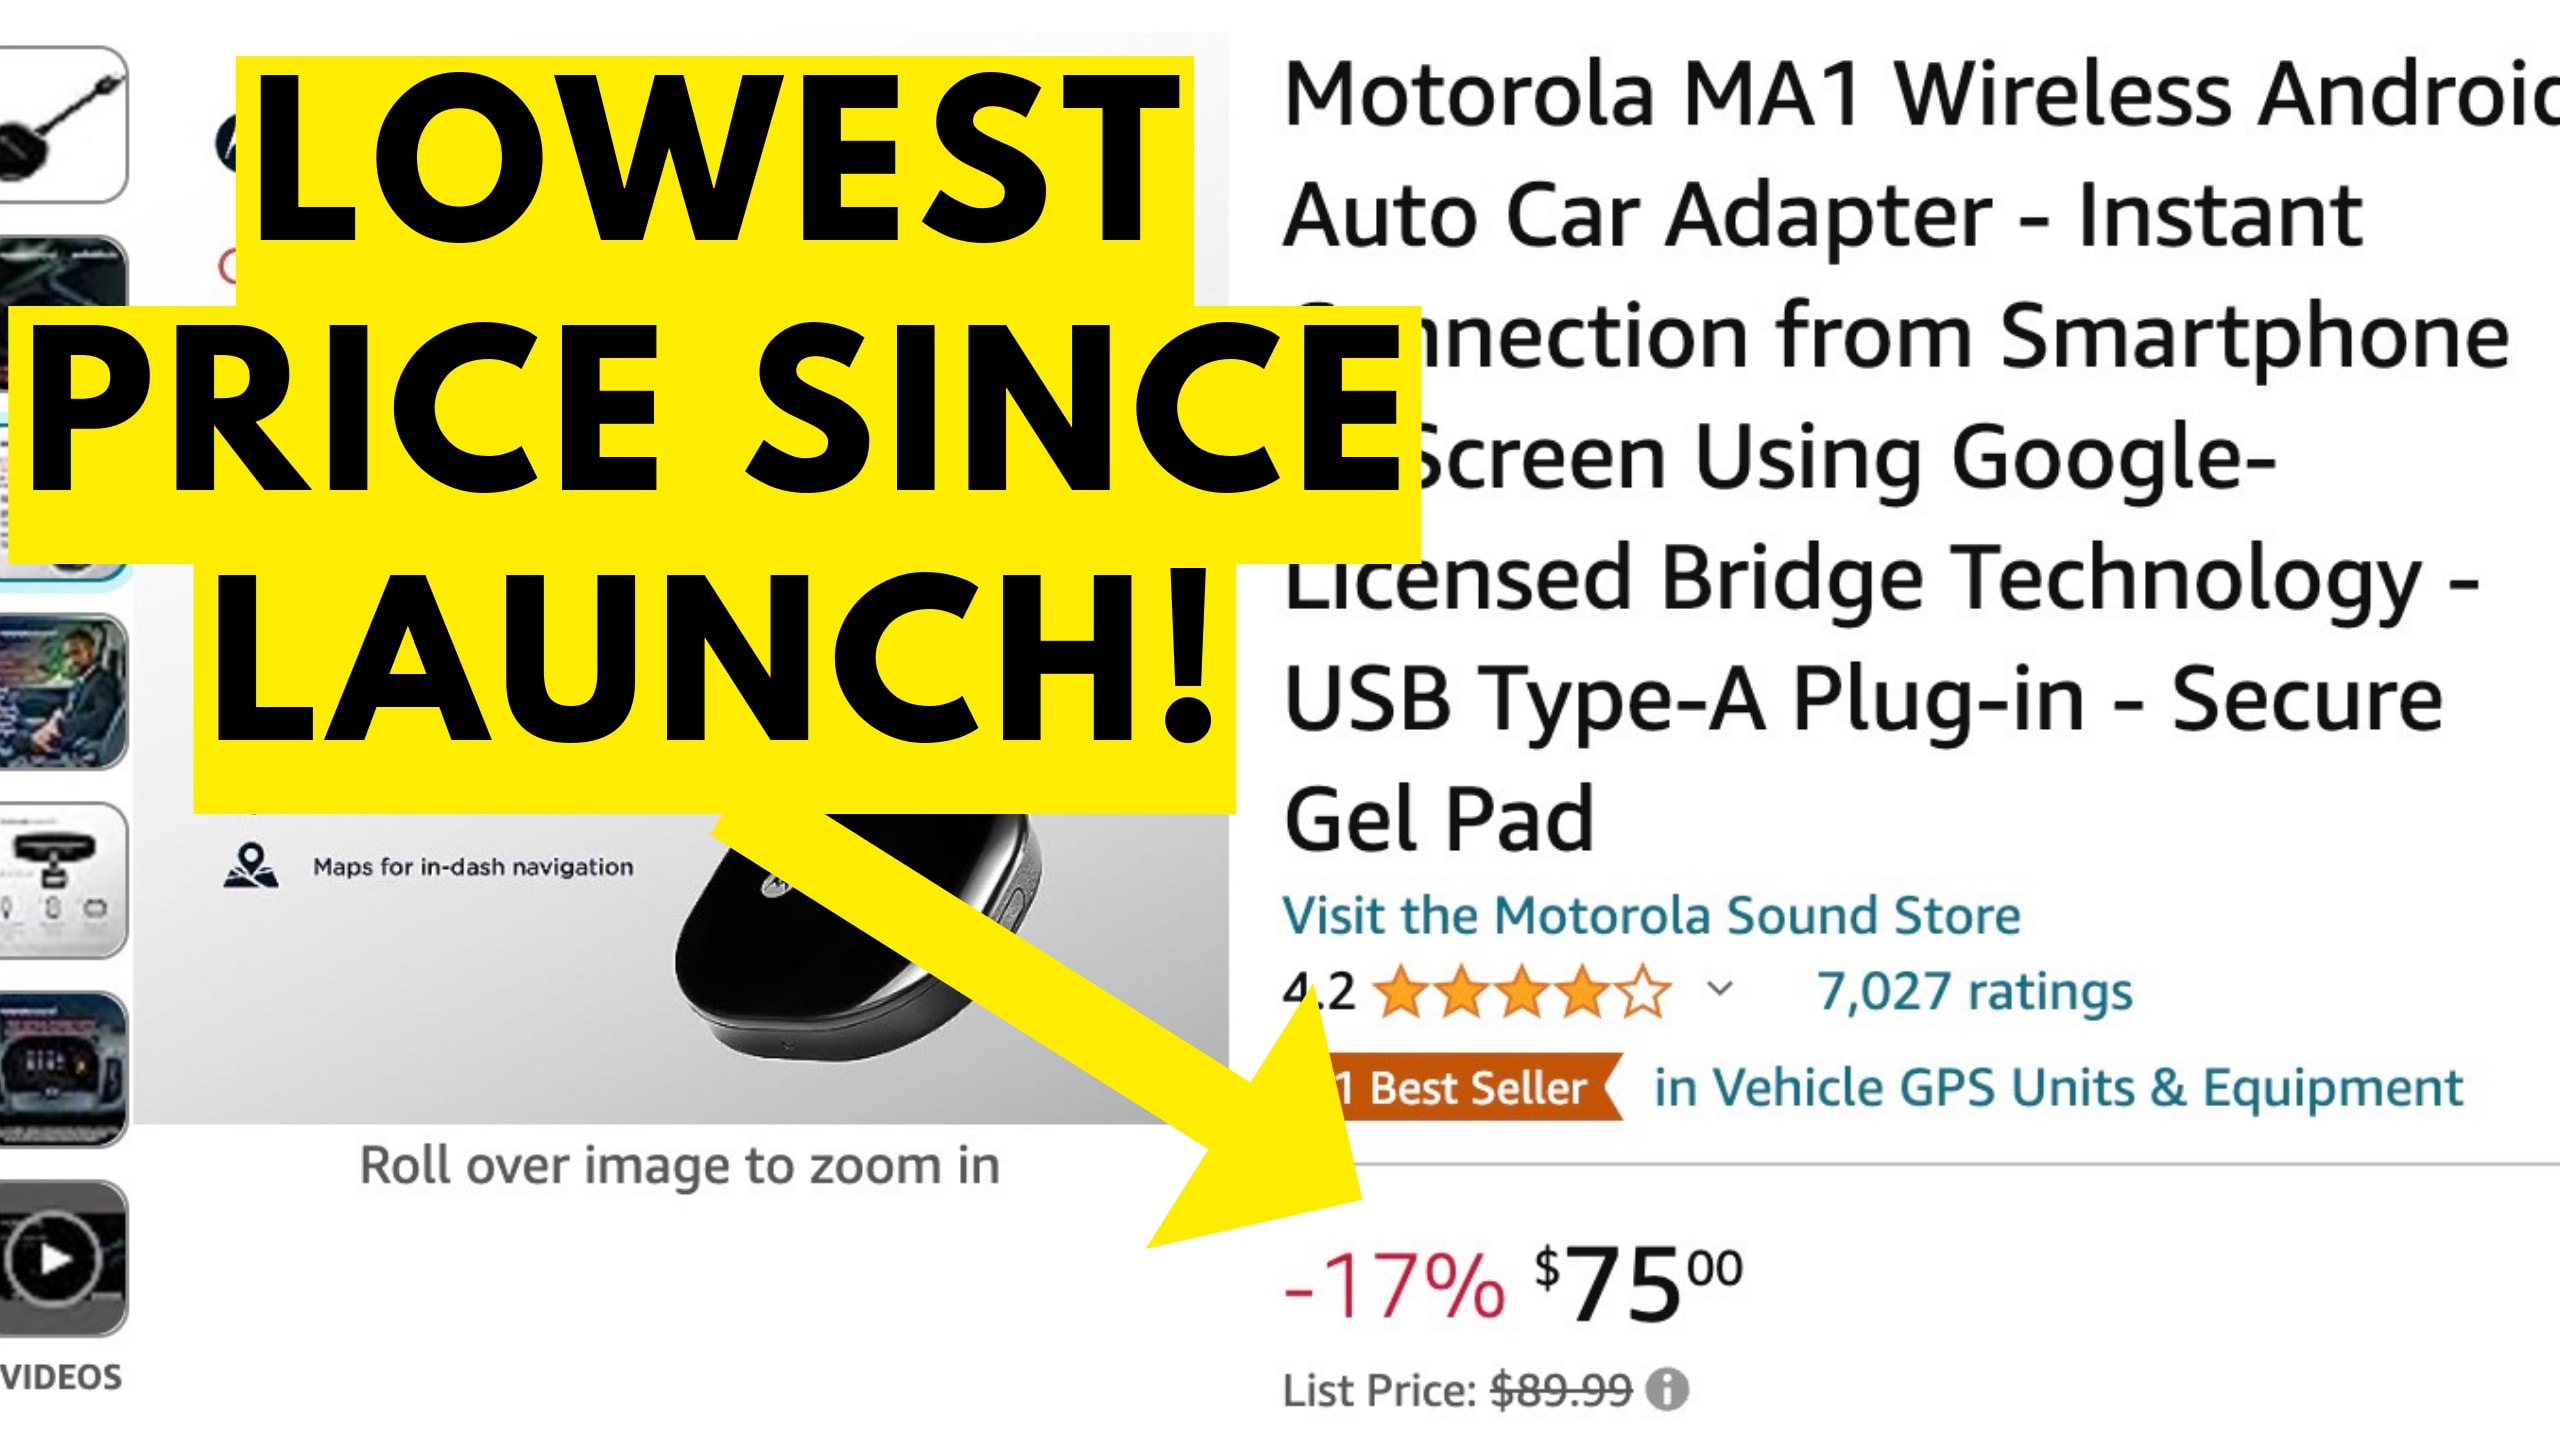 Motorola Wireless Car Adapter for Android Auto Black MA1 - Best Buy